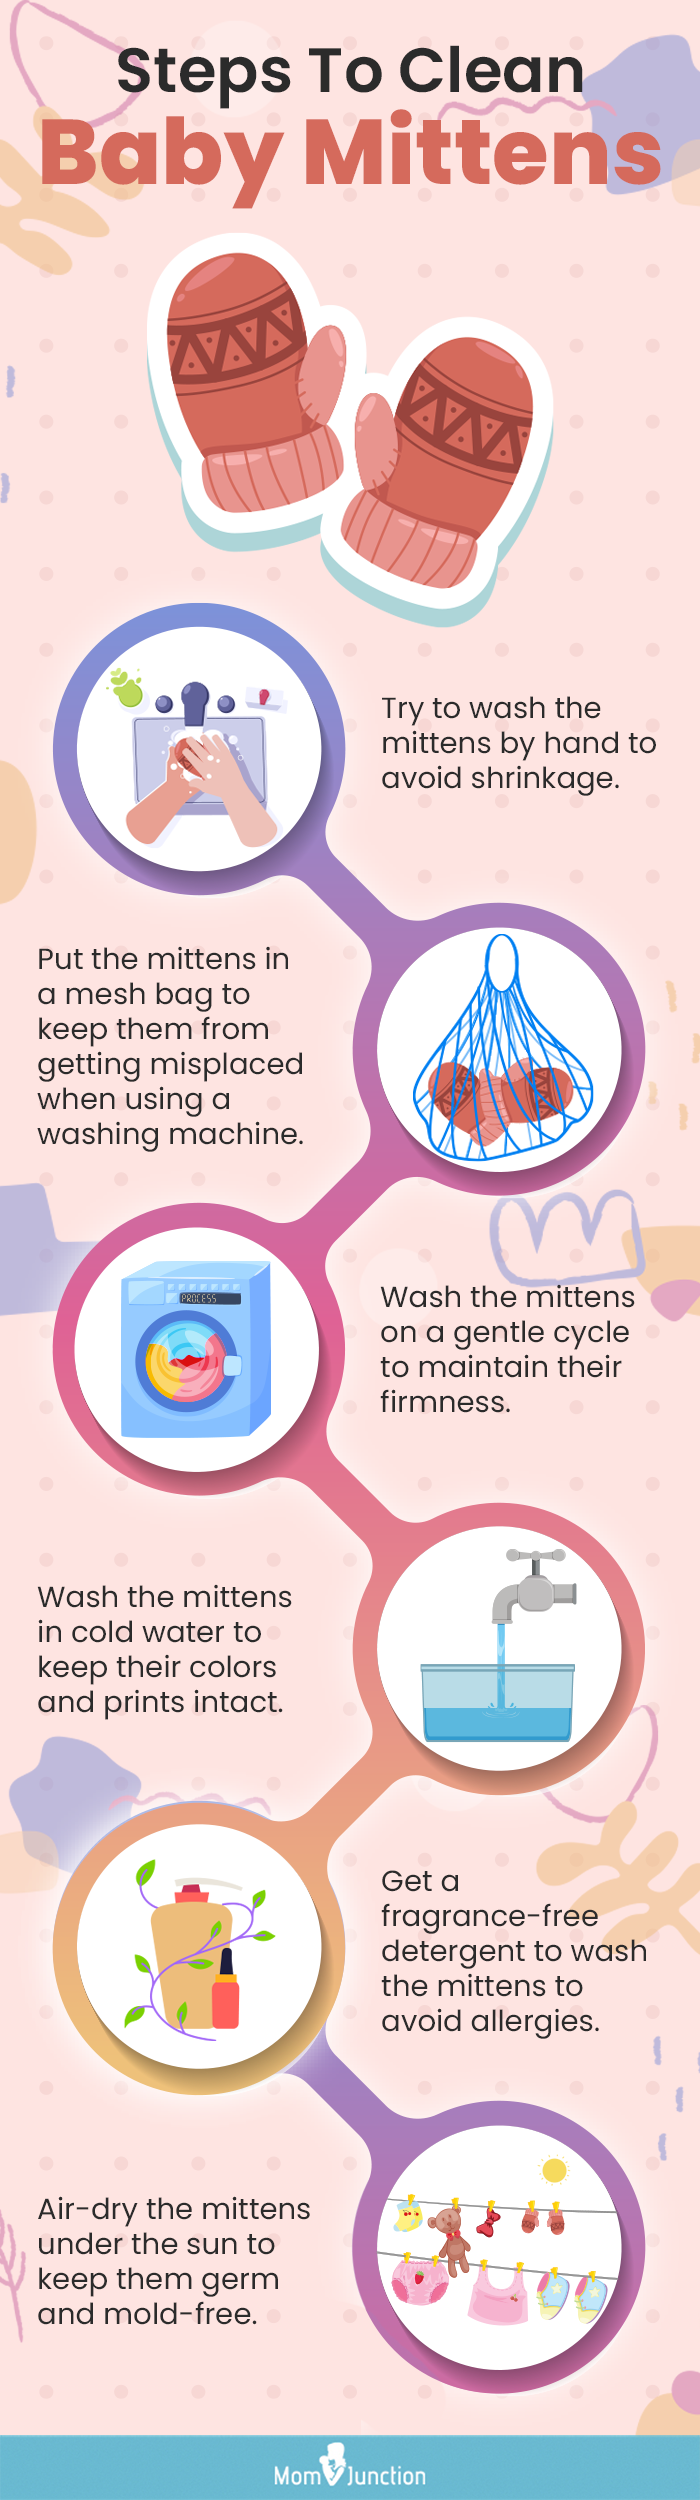 Steps To Clean Baby Mittens